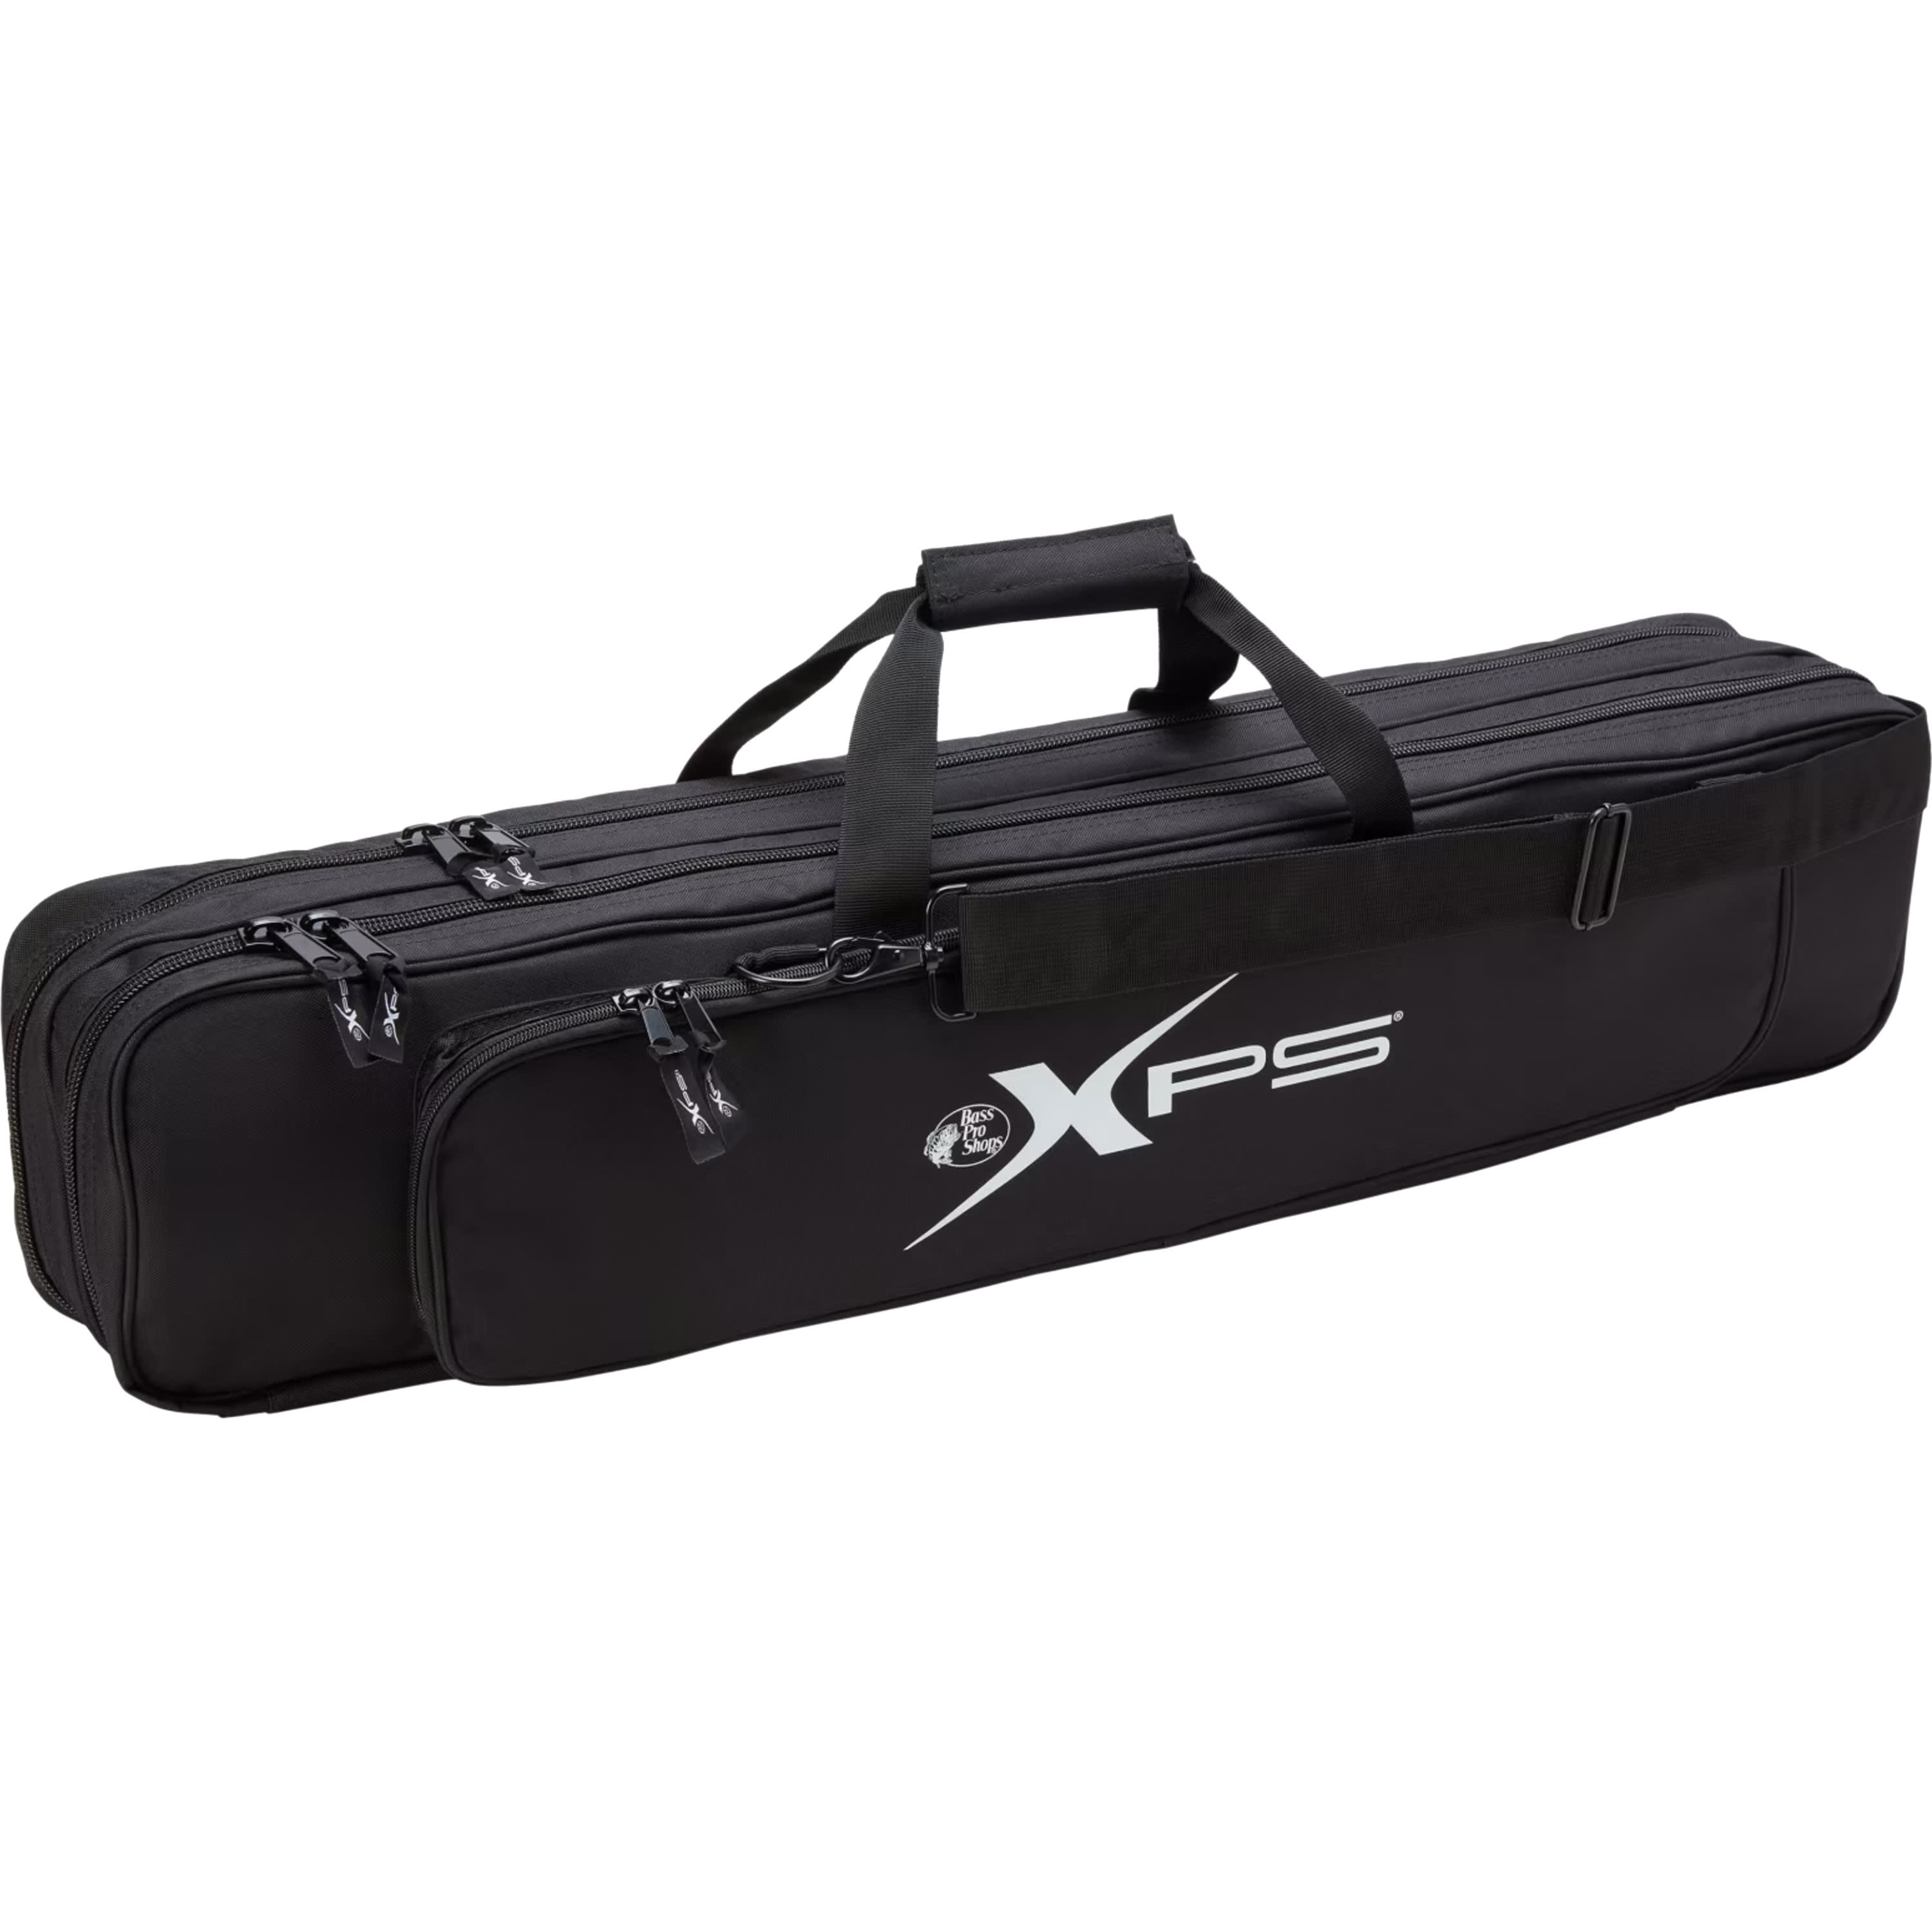 Bass Pro Shops® XPS® Deluxe Eight-Rod Ice-Rod Bag